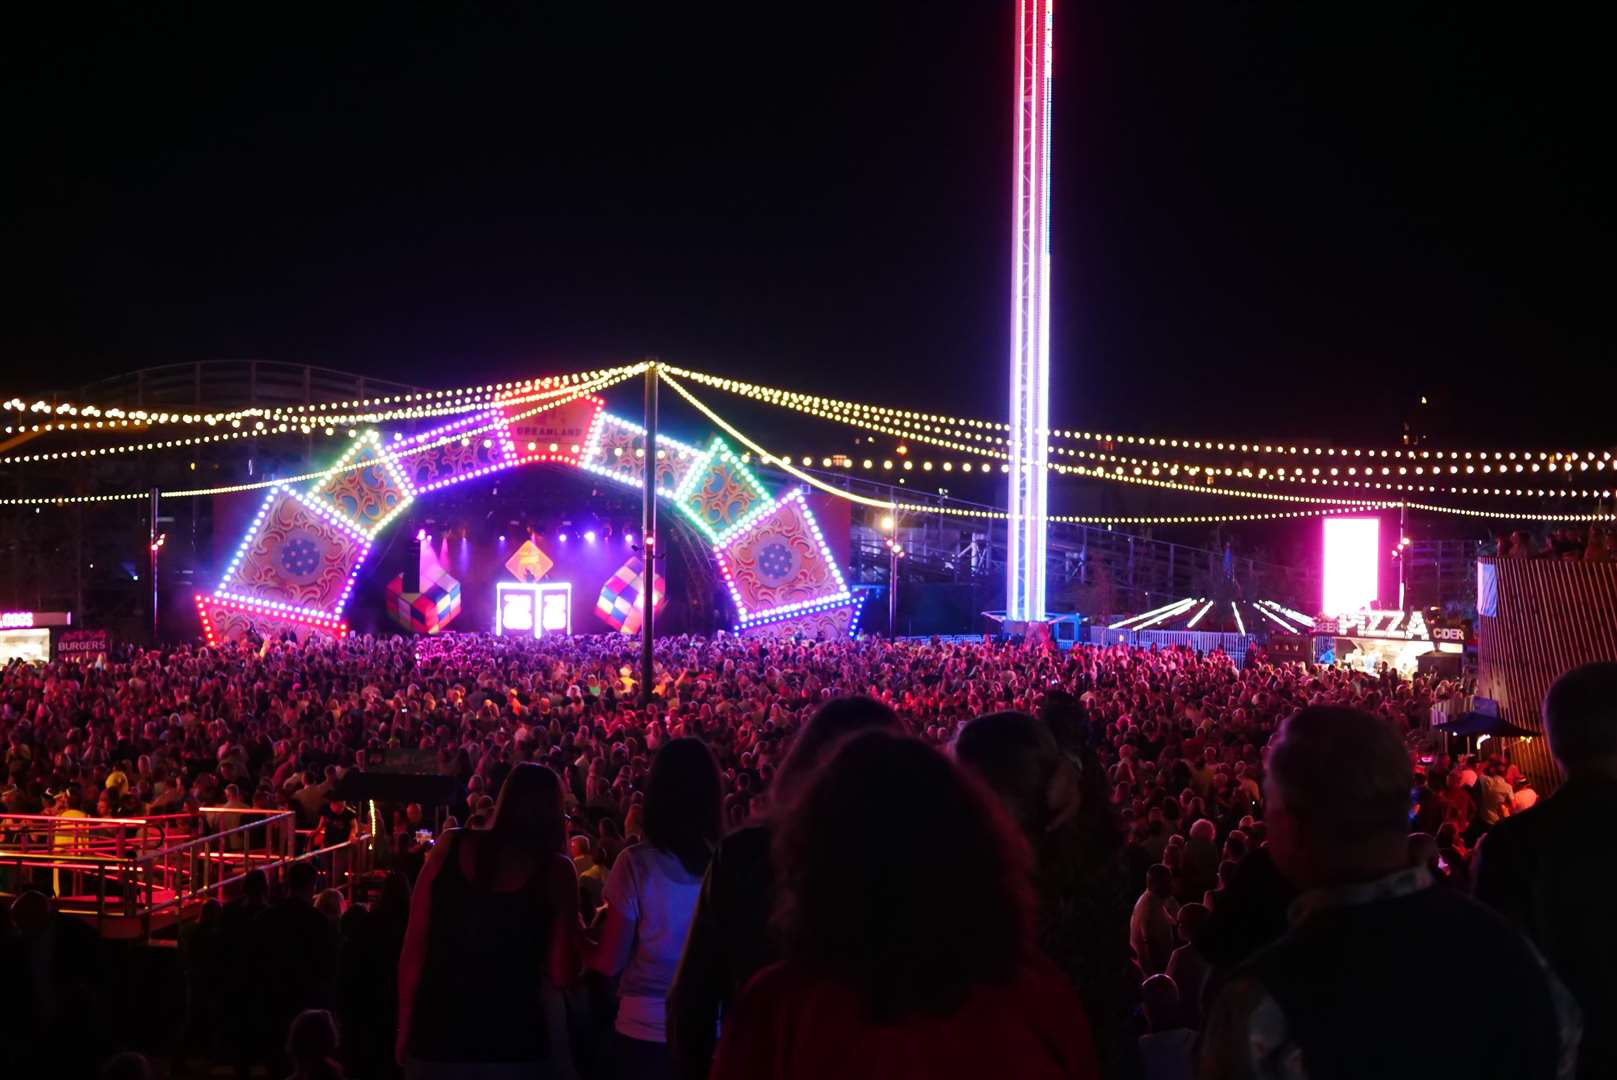 Dreamland in Margate has scrapped entry prices for its opening season in 2019 (7302193)